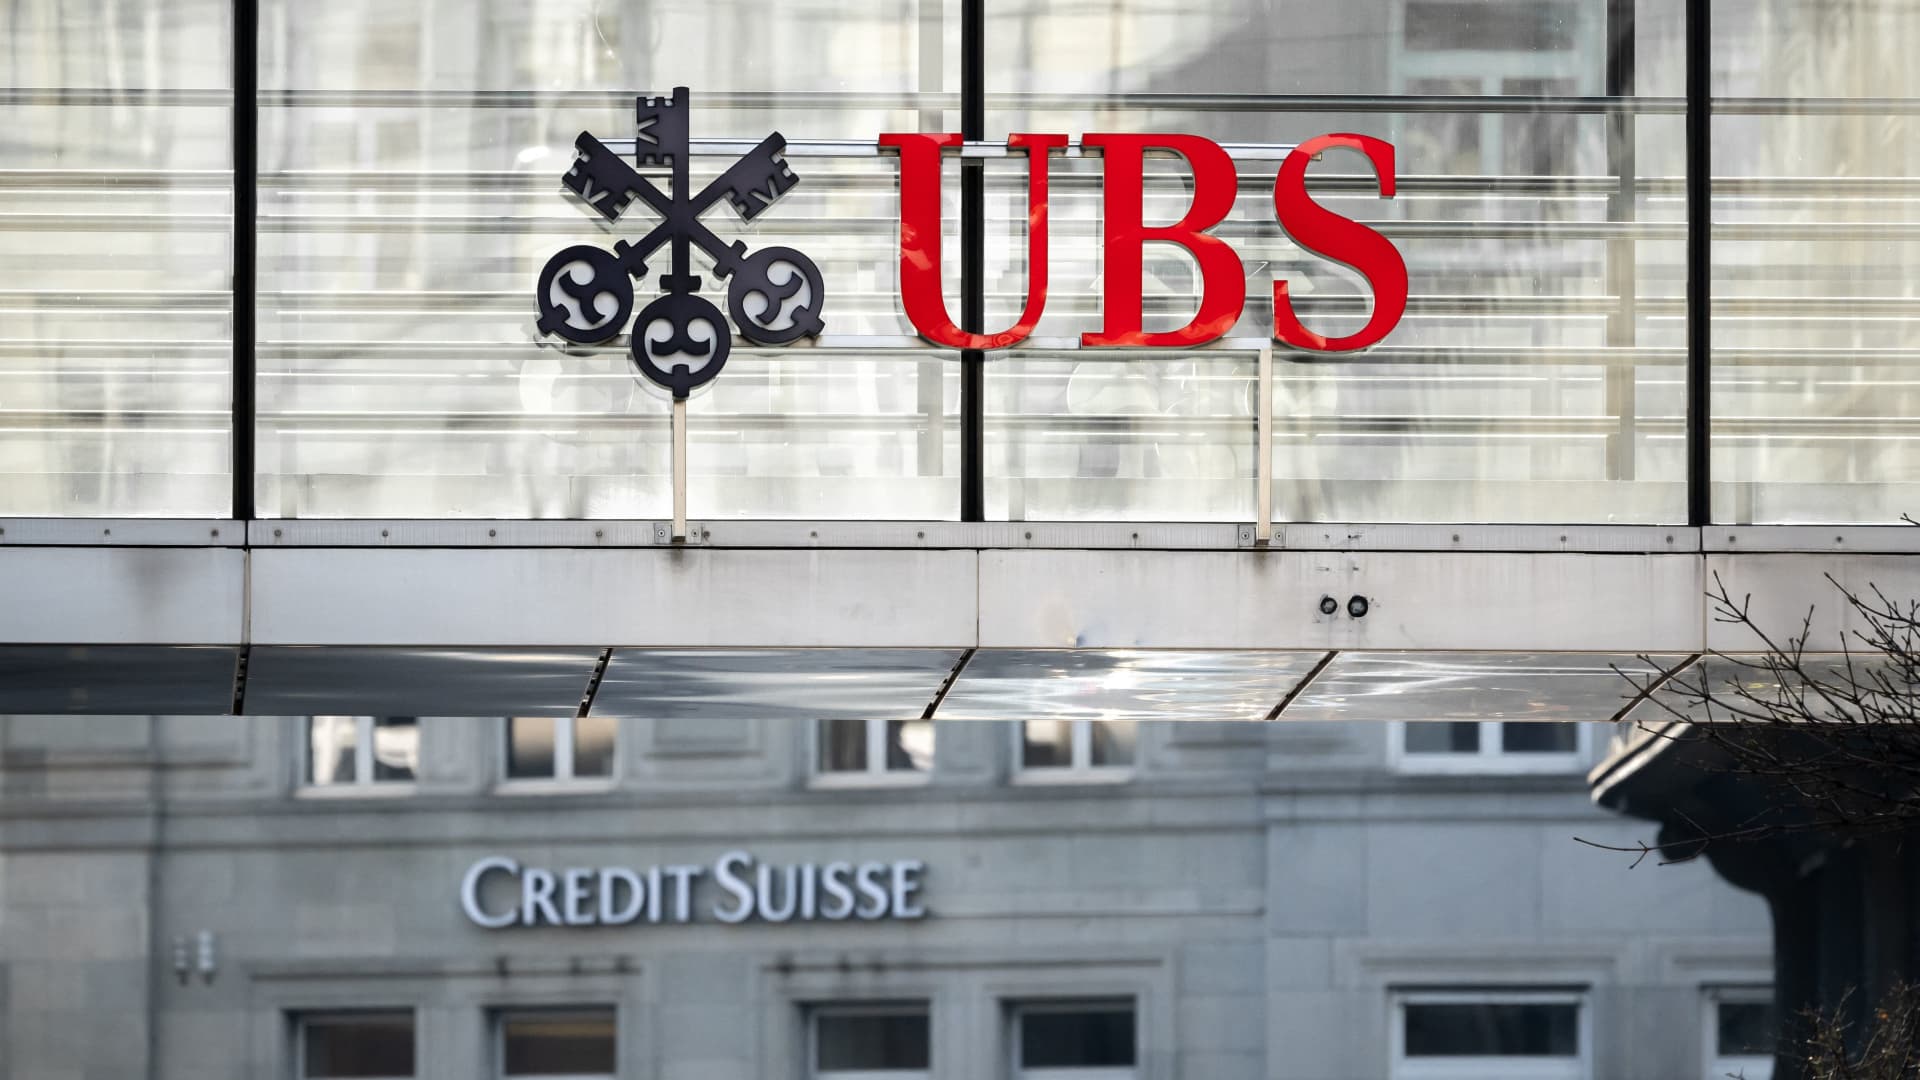 UBS and the Swiss government sign loss protection agreement over Credit Suisse takeover